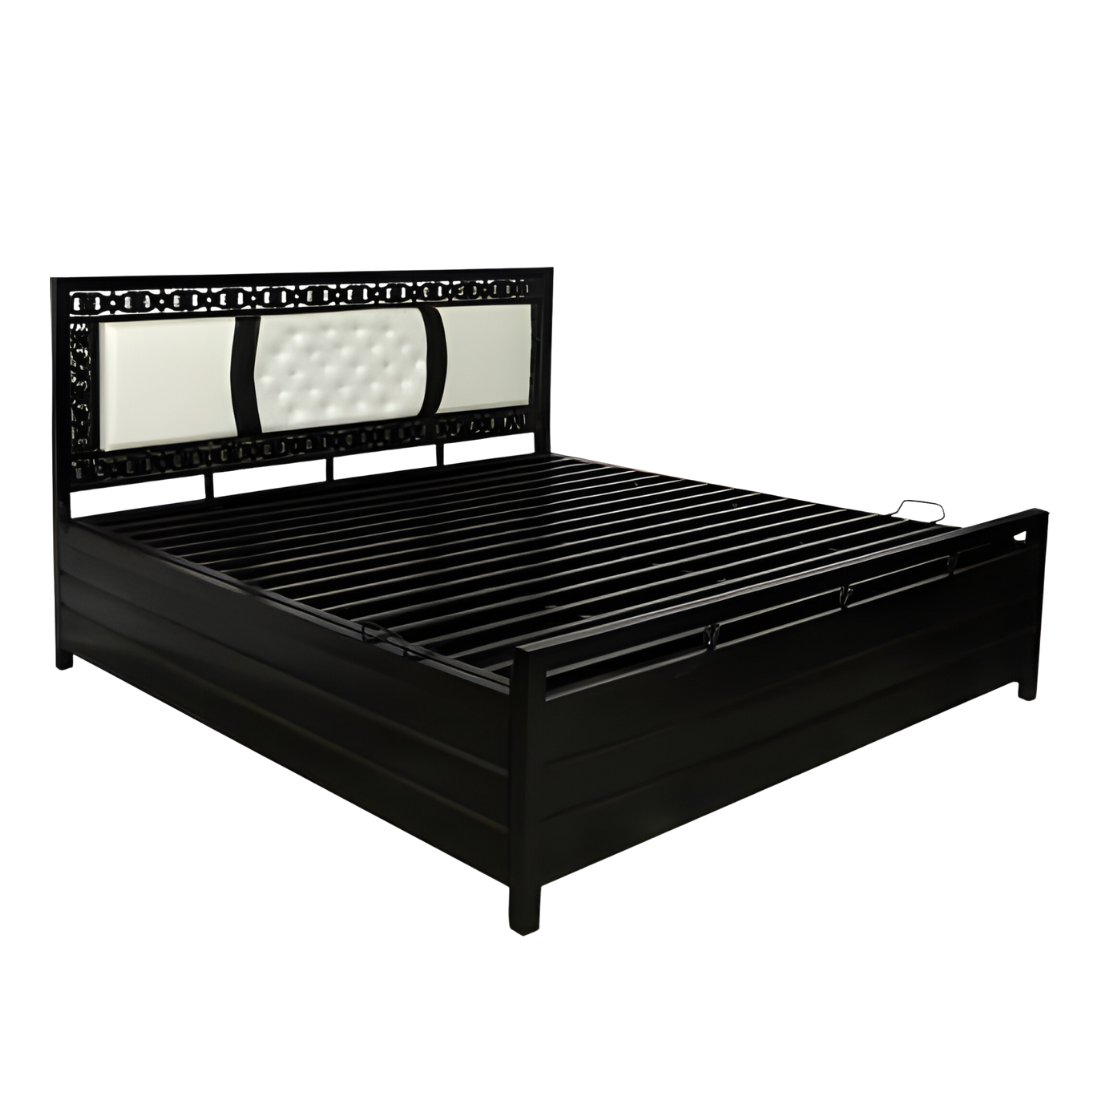 Bostan Hydraulic Storage Queen Metal Bed with White Cushion Headrest (Color - Black)